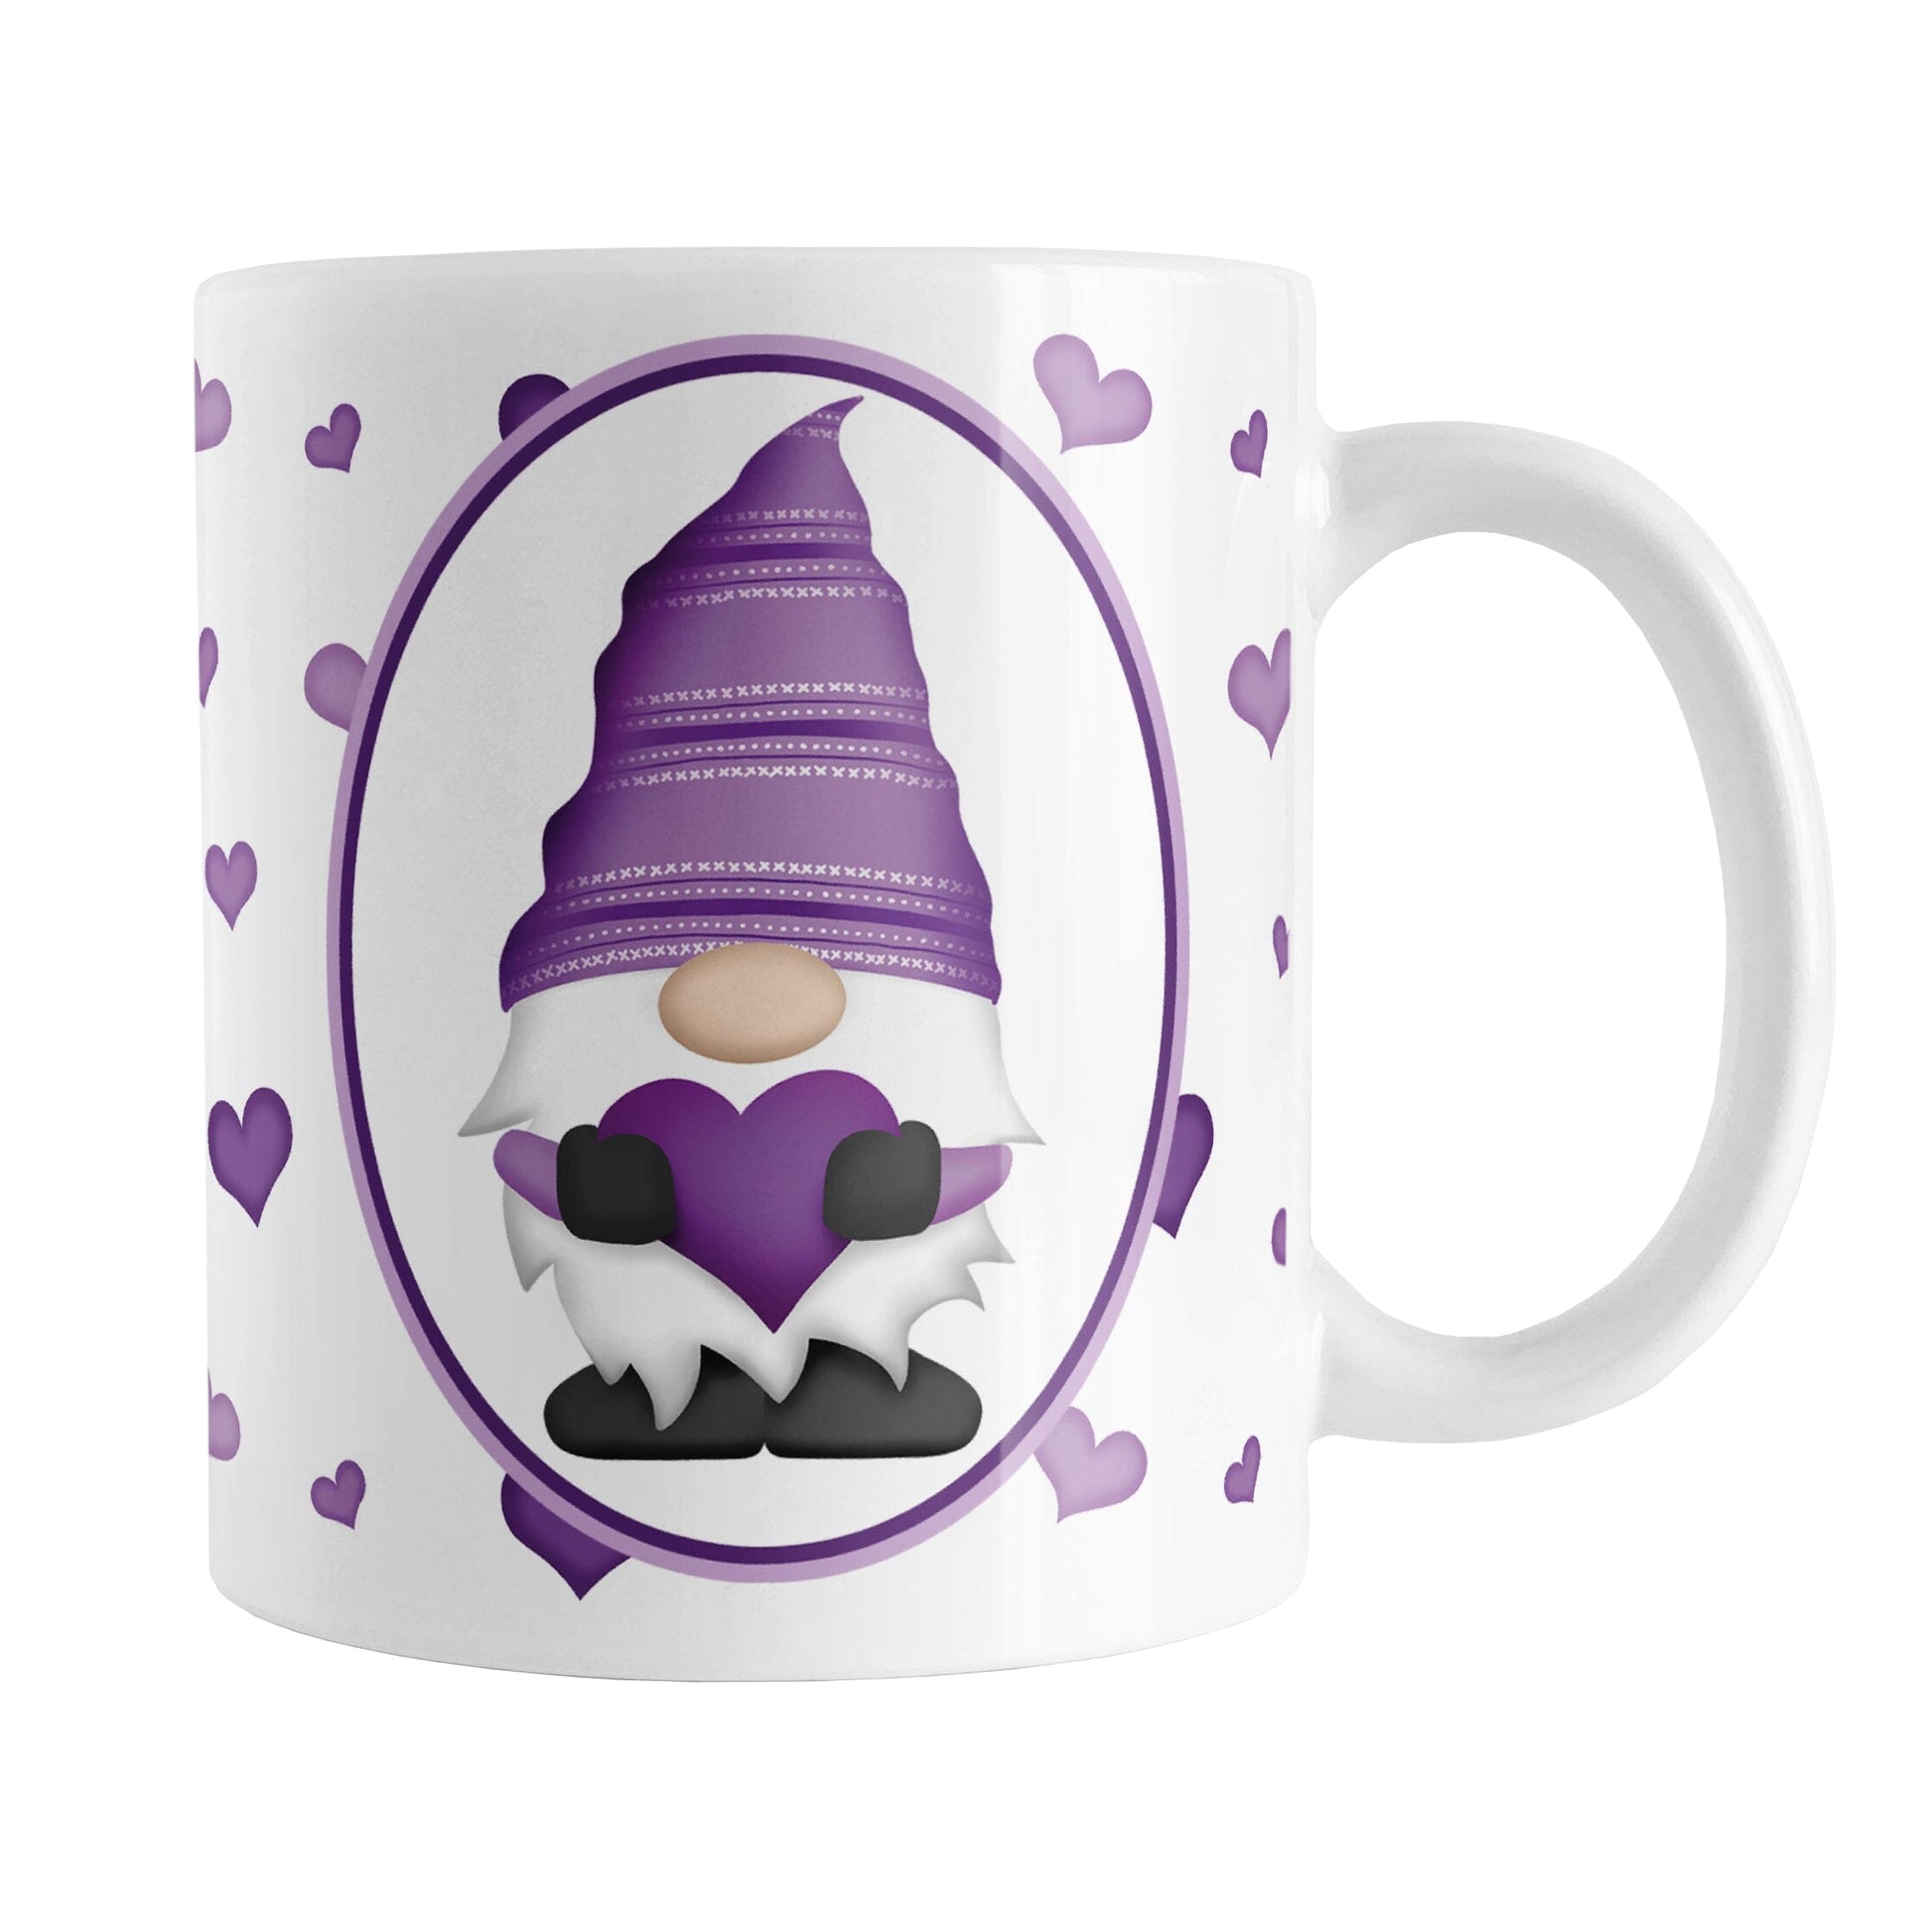 Purple Gnome Dainty Hearts Mug (11oz) at Amy's Coffee Mugs. A ceramic coffee mug designed with an adorable purple gnome in a white oval on both sides of the mug over a pattern of cute dainty hearts in different shades of purple that wrap around the mug to the handle.